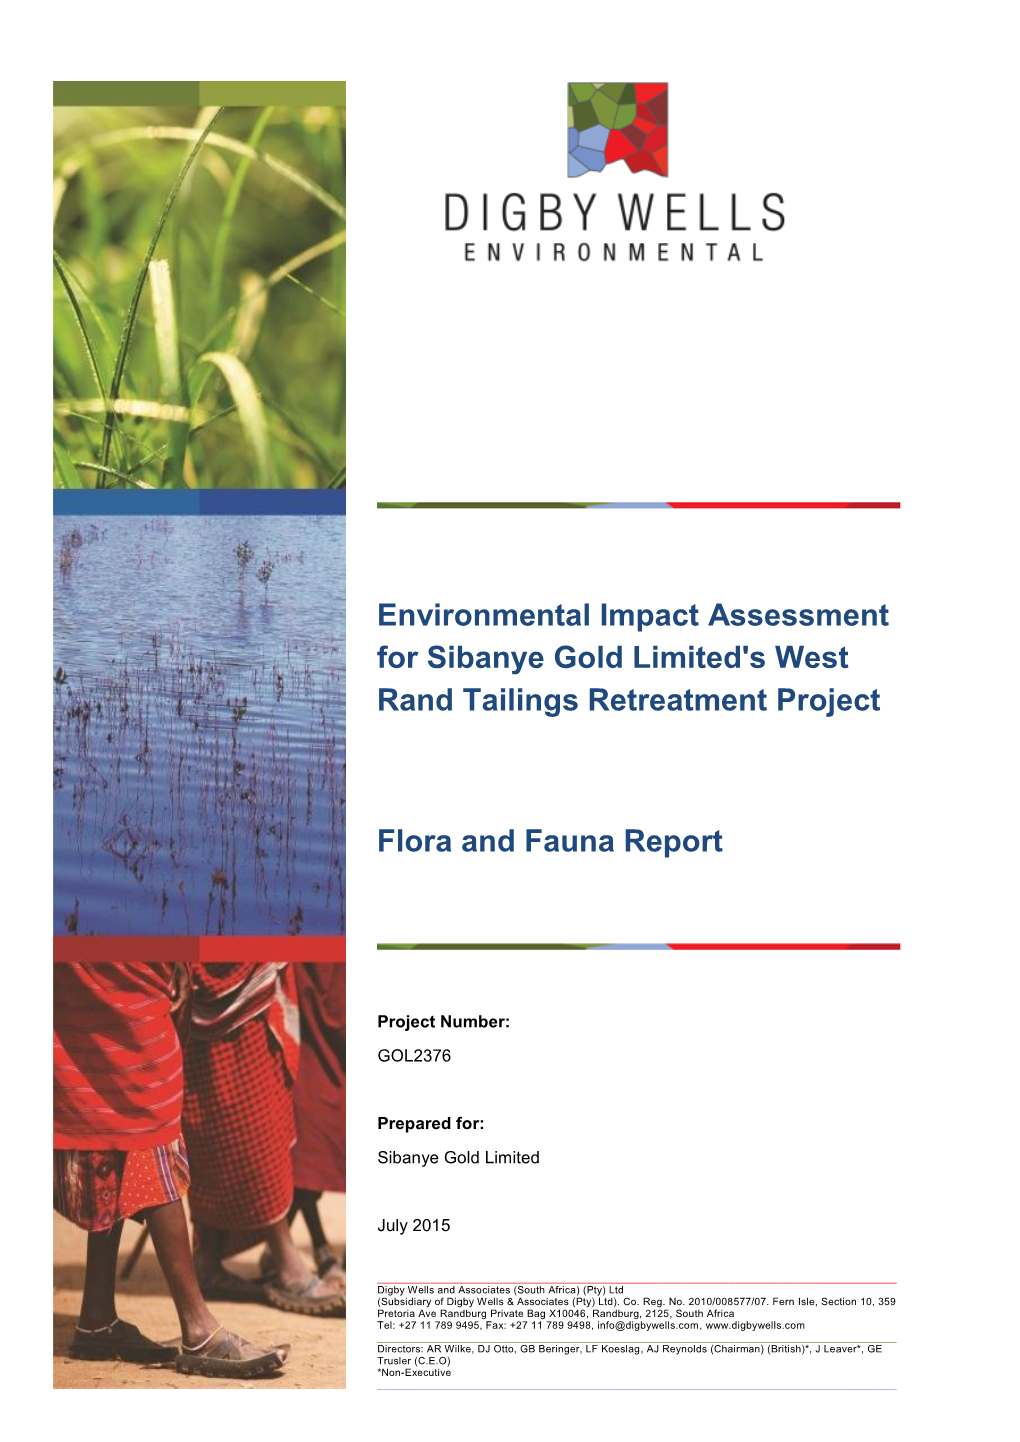 Environmental Impact Assessment for Sibanye Gold Limited's West Rand Tailings Retreatment Project